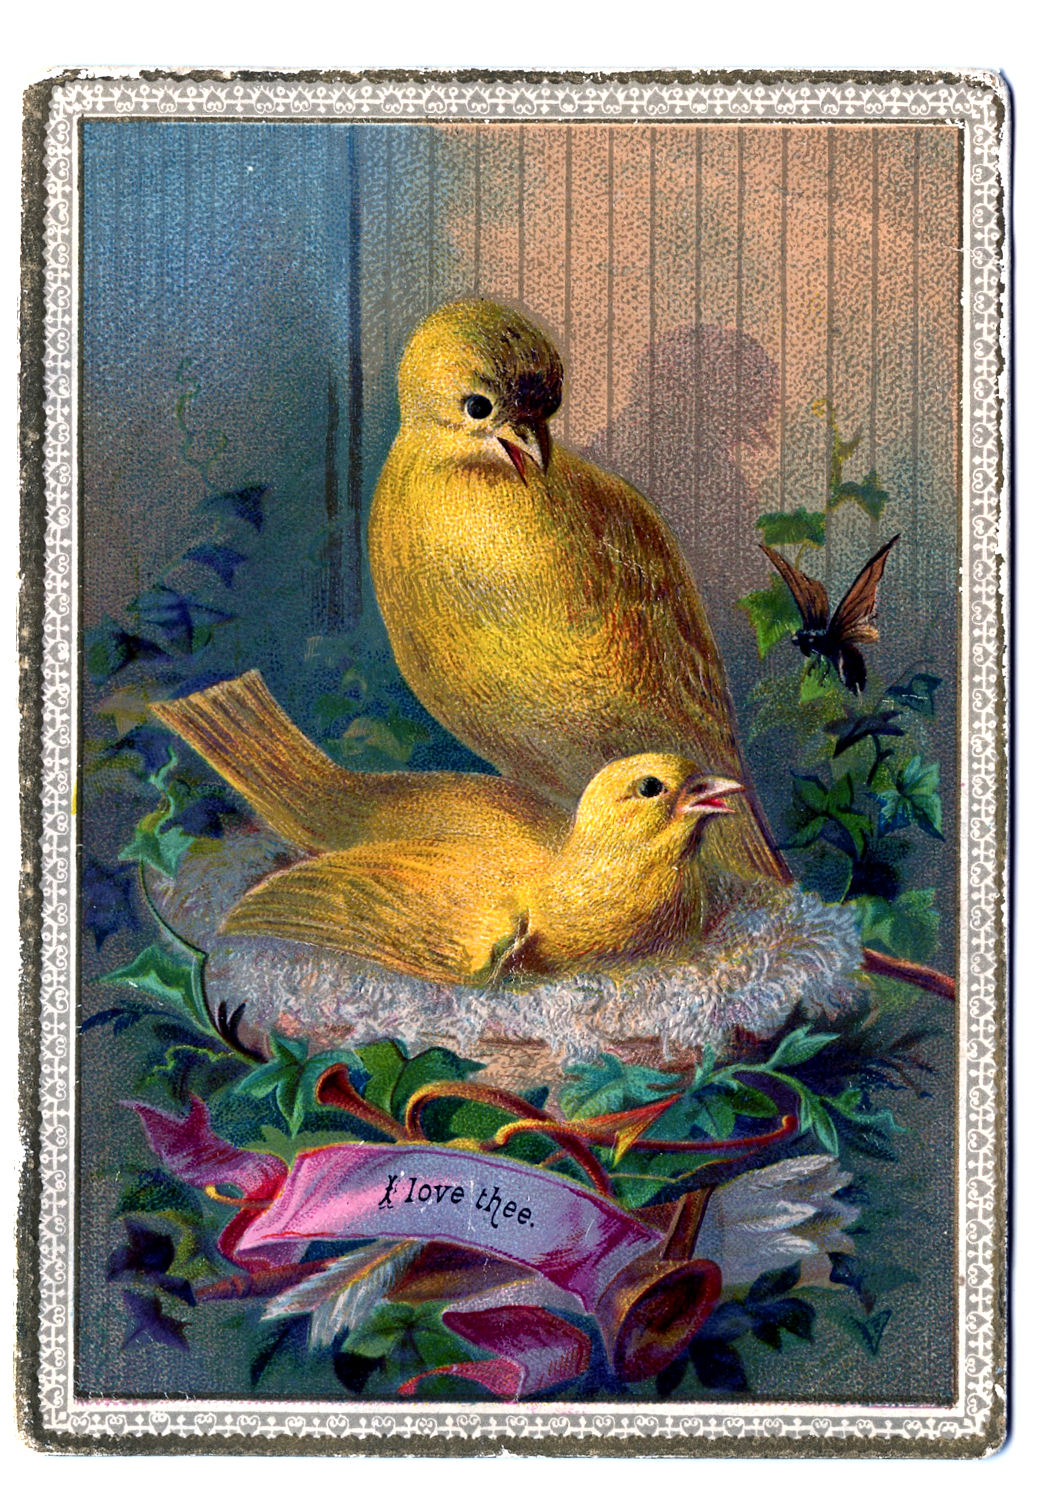 Vintage Clip Art - Darling Canary Birds on Nest - The Graphics Fairy